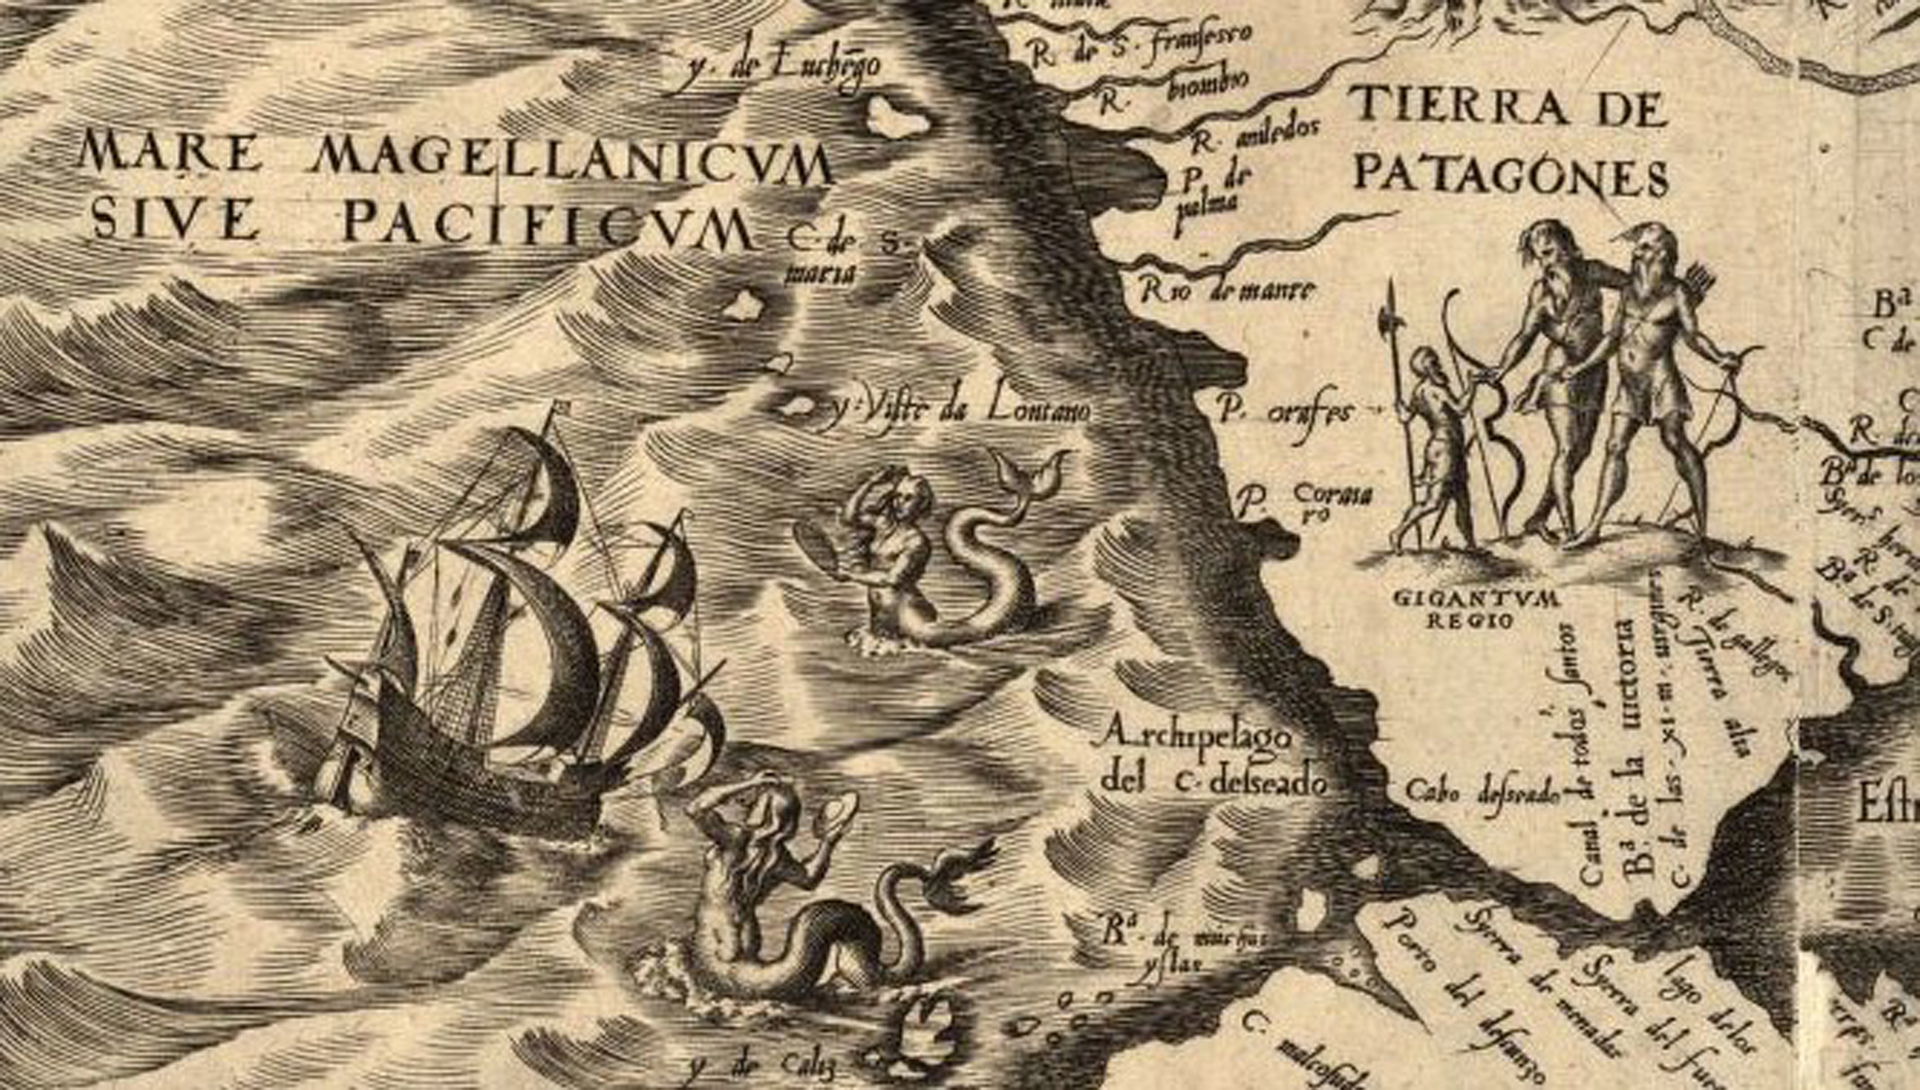 The regions they knew, from the point of view of Magellan and his men